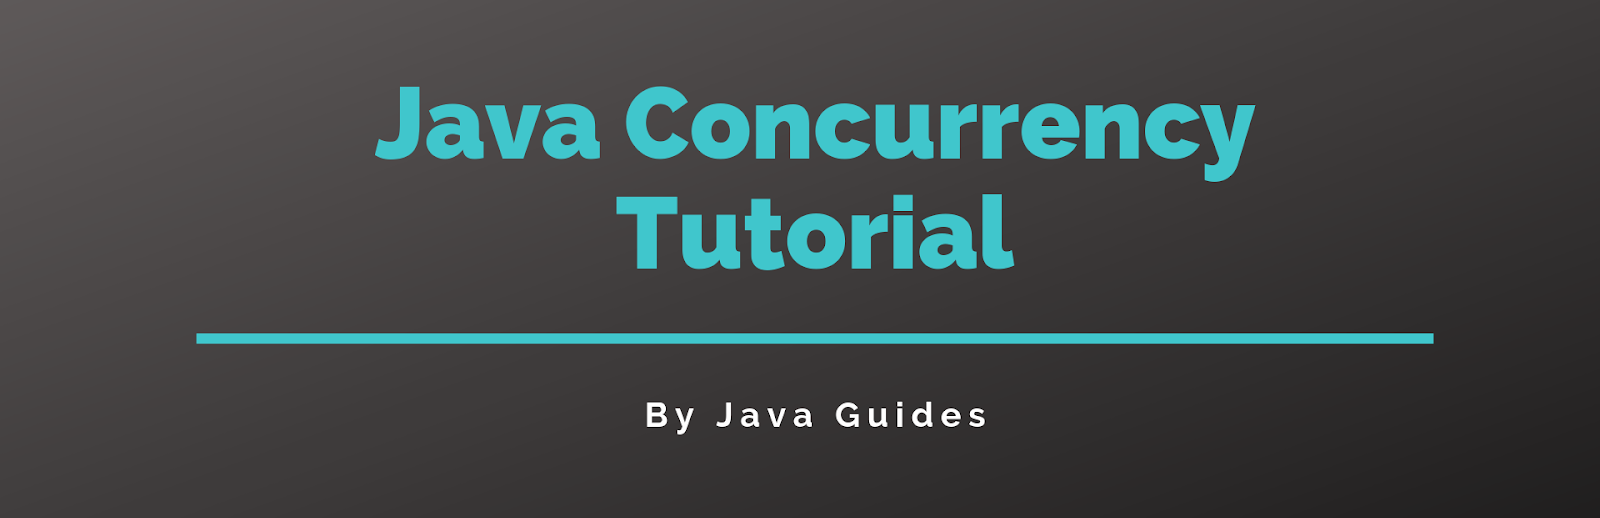 Java Concurrency Tutorial.png